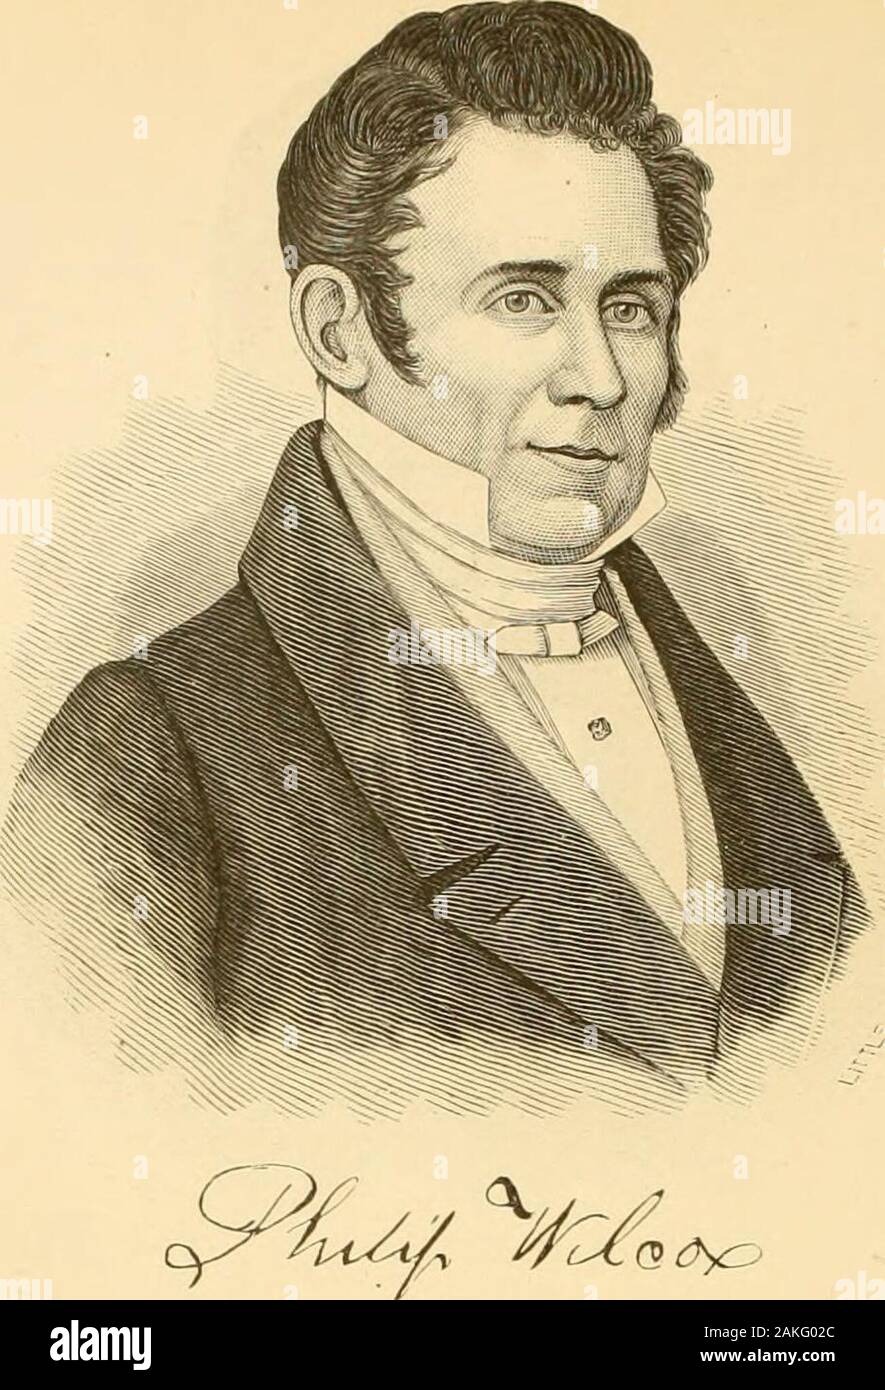 History of the Connecticut Valley in Massachusetts, with illustrations and biographical sketches of some of its prominent men and pioneers . ame toSpringfield and took charge of the old American House,remaining there but a few months, when, in 1858, he waselected to the office of register of deeds, and has held thatoffice continuously since, and discharged the duties withgreat credit to himself and the entire satisfaction of thepeople. It is evident that Mr. Russell commands the respect ofhis fellow-citizens in a remarkable degree, from the fact thathe has been successively chosen to this impo Stock Photo